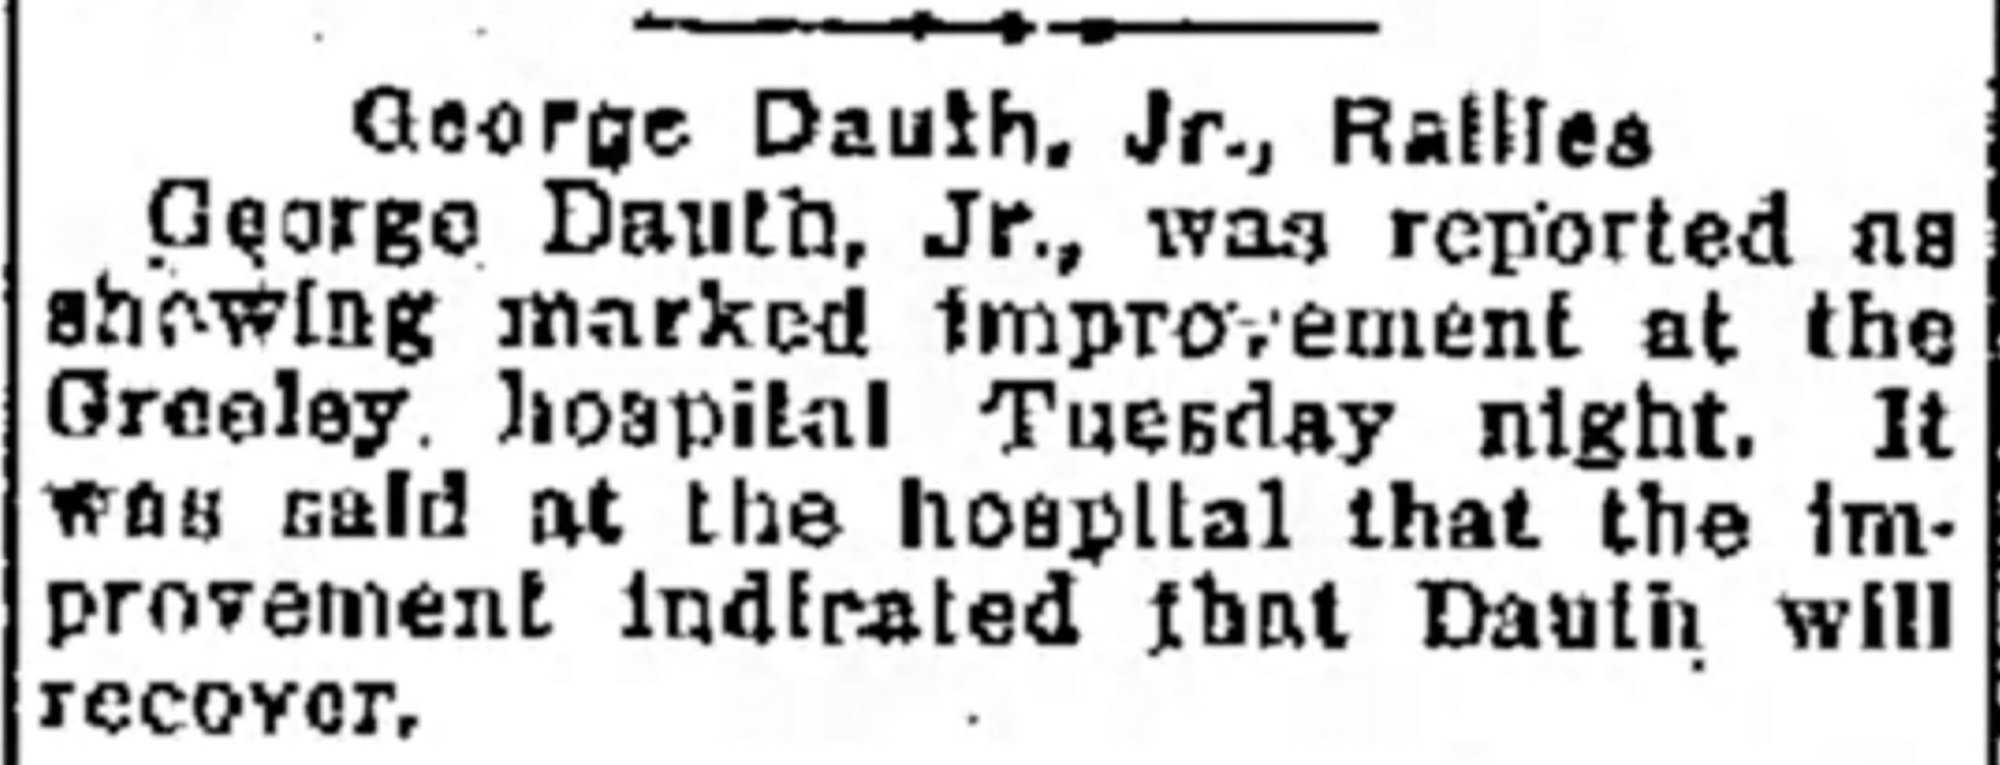 Dauth Family Archive - 1932-05-04 - Greeley Daily Tribune - June Dauth Health Improving